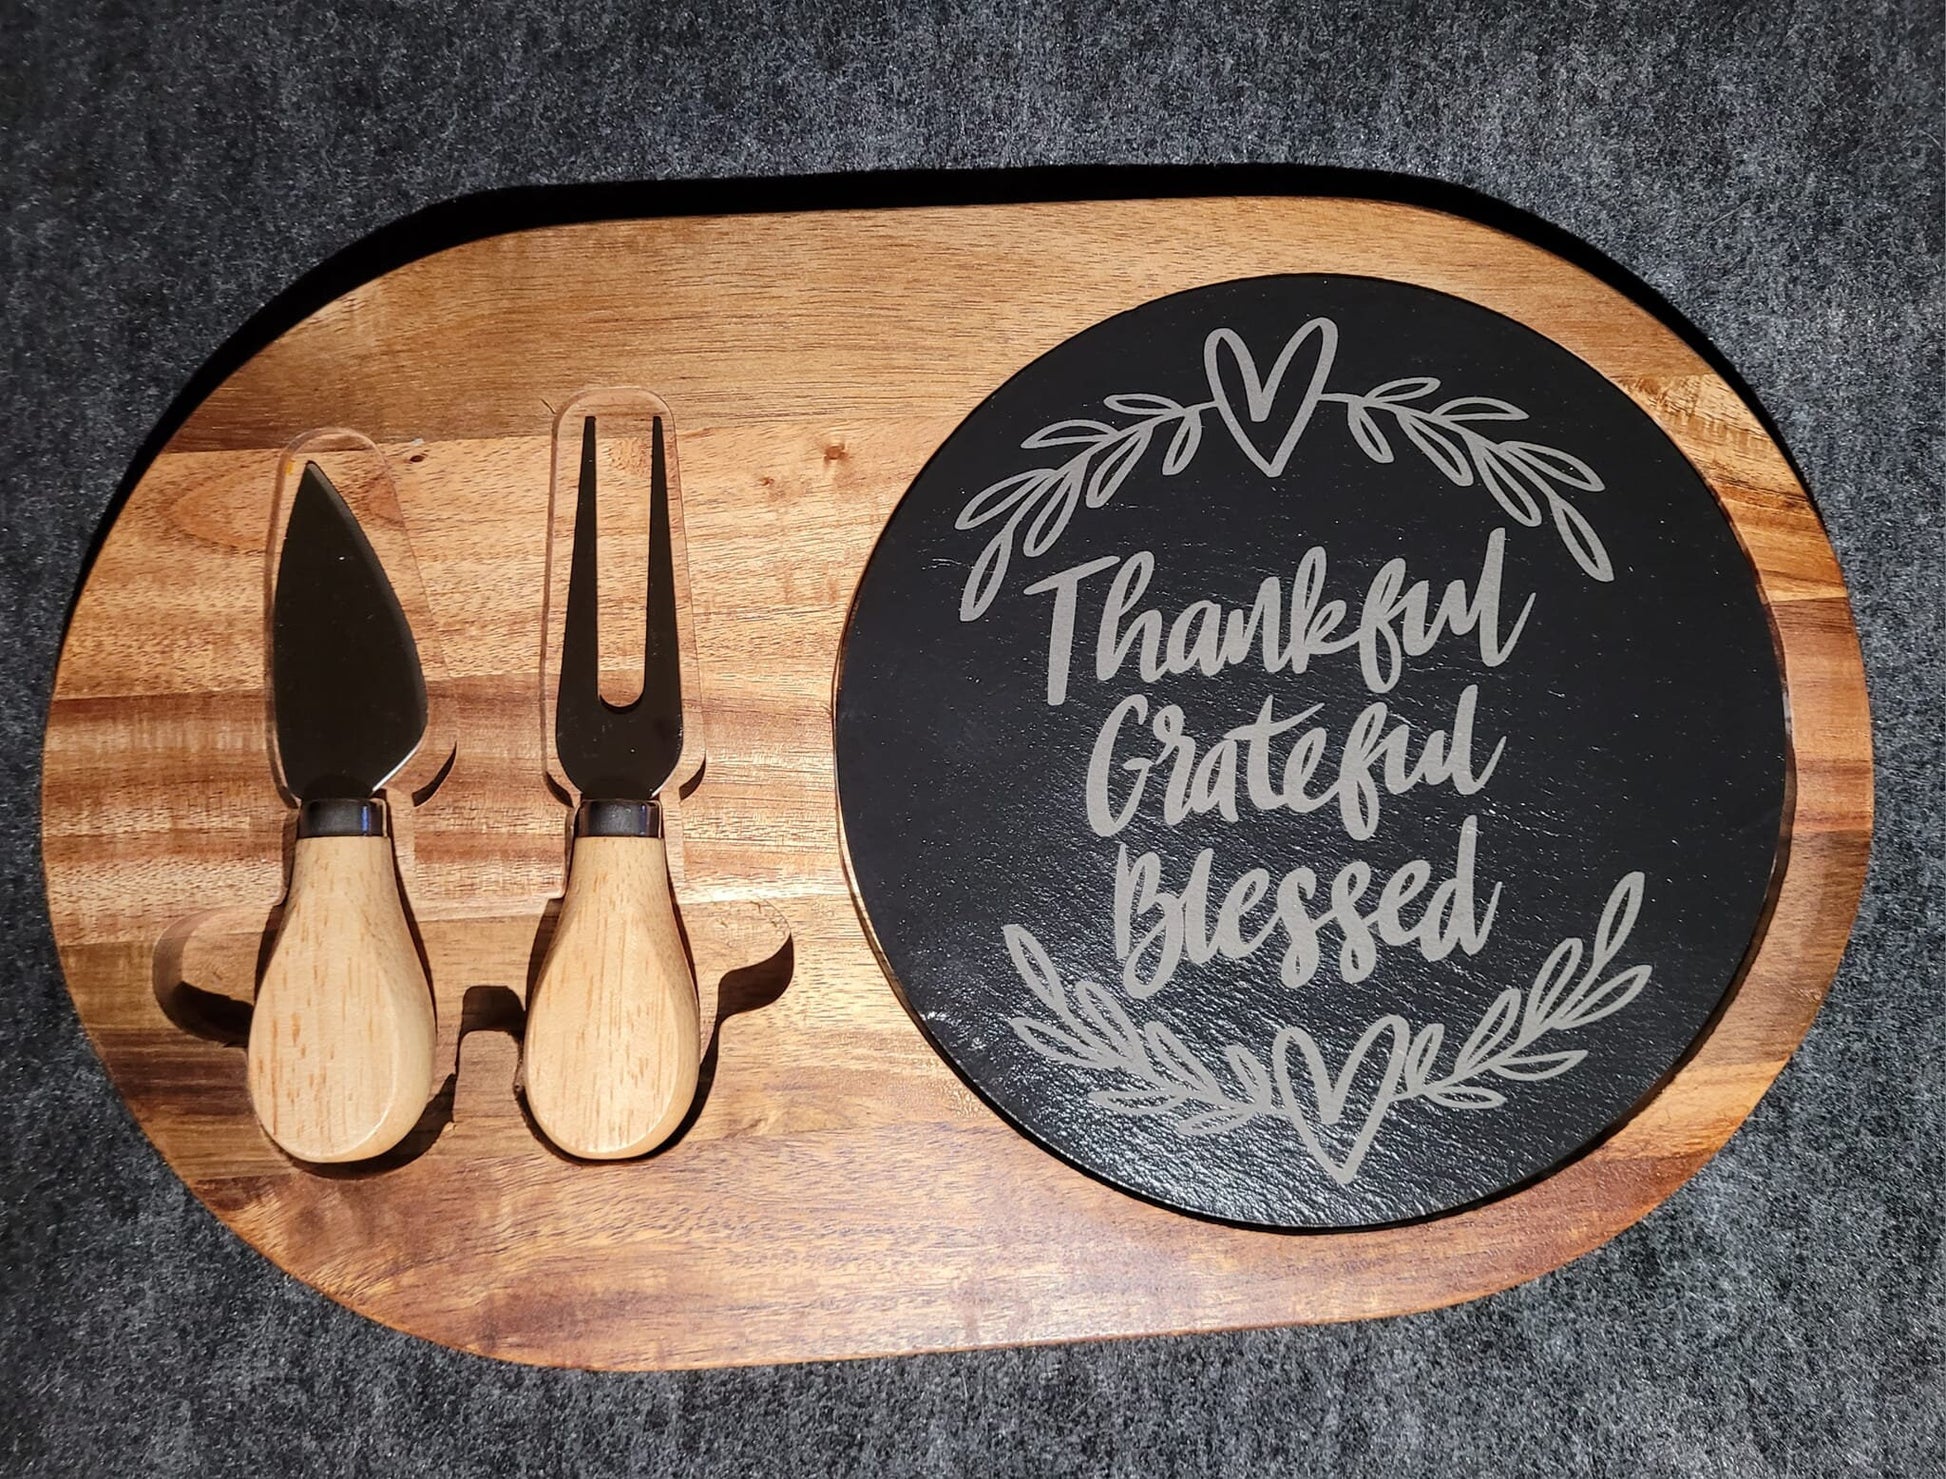 Acacia Wood/Slate Oval Cheese Set engraved with Thankful Grateful Blessed